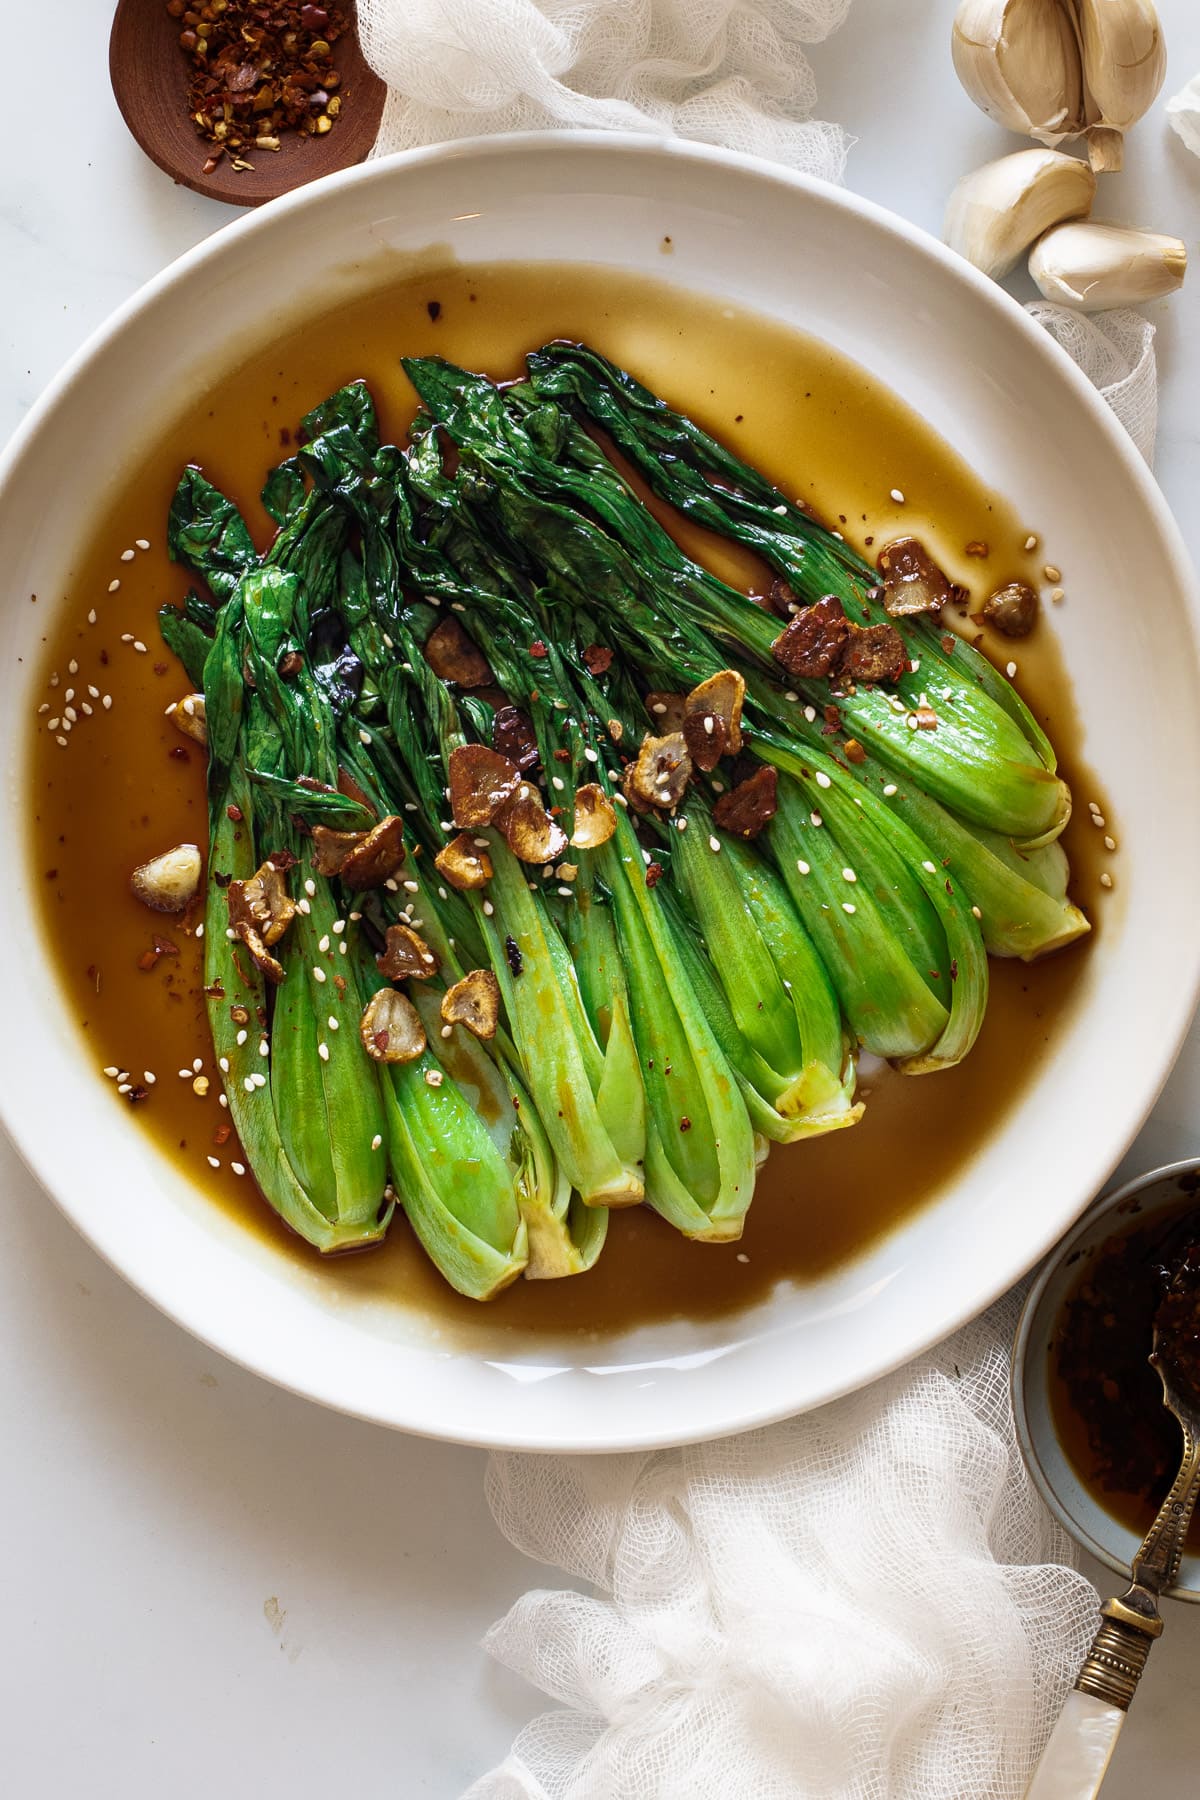 Pak choi with oyster sauce layered on a plate with garlic scattered over